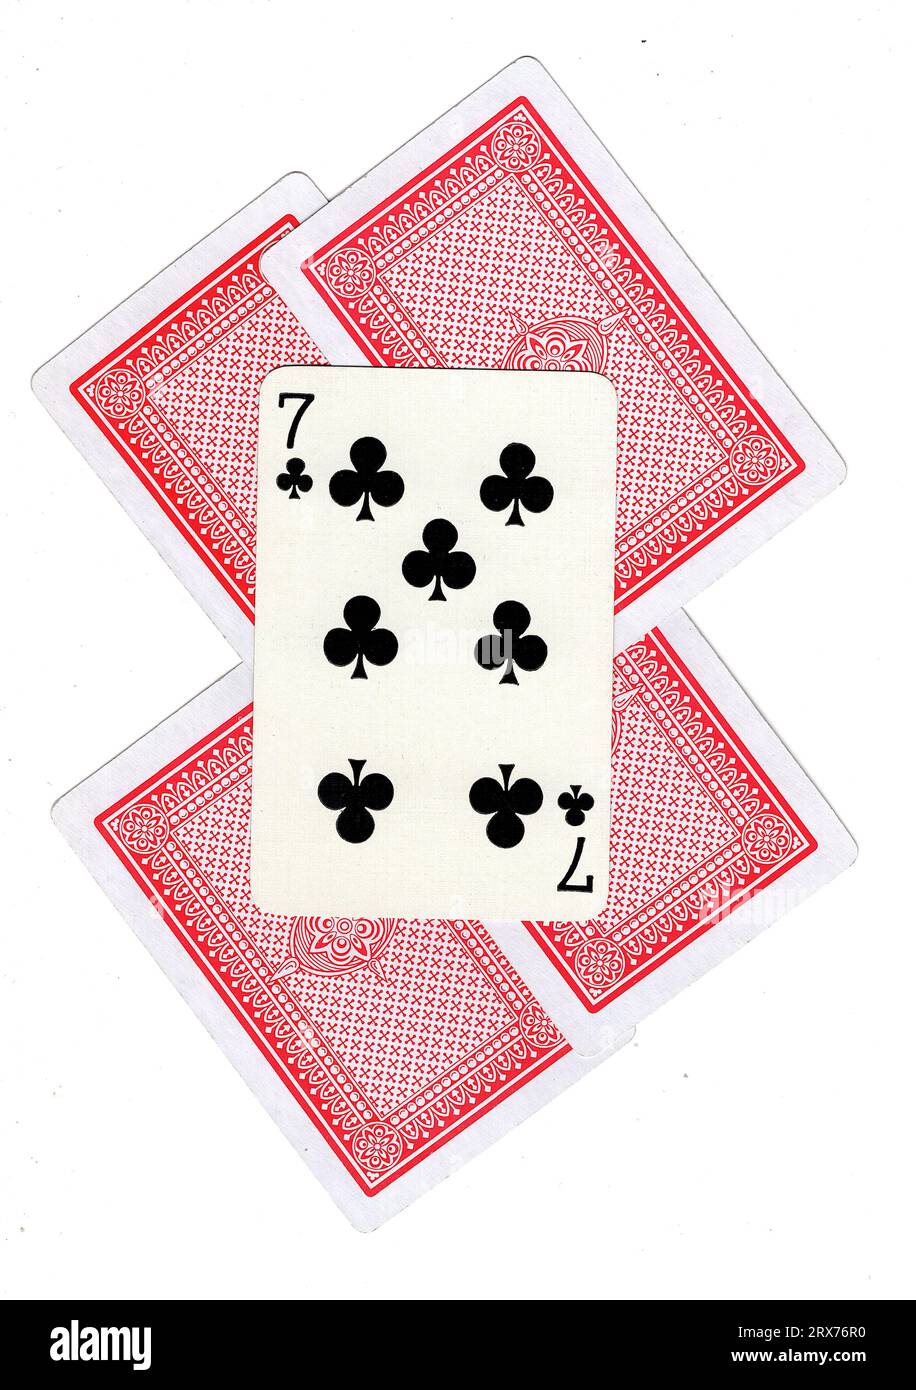 A montage of vintage playing card backs with the seven of clubs revealed. Stock Photo